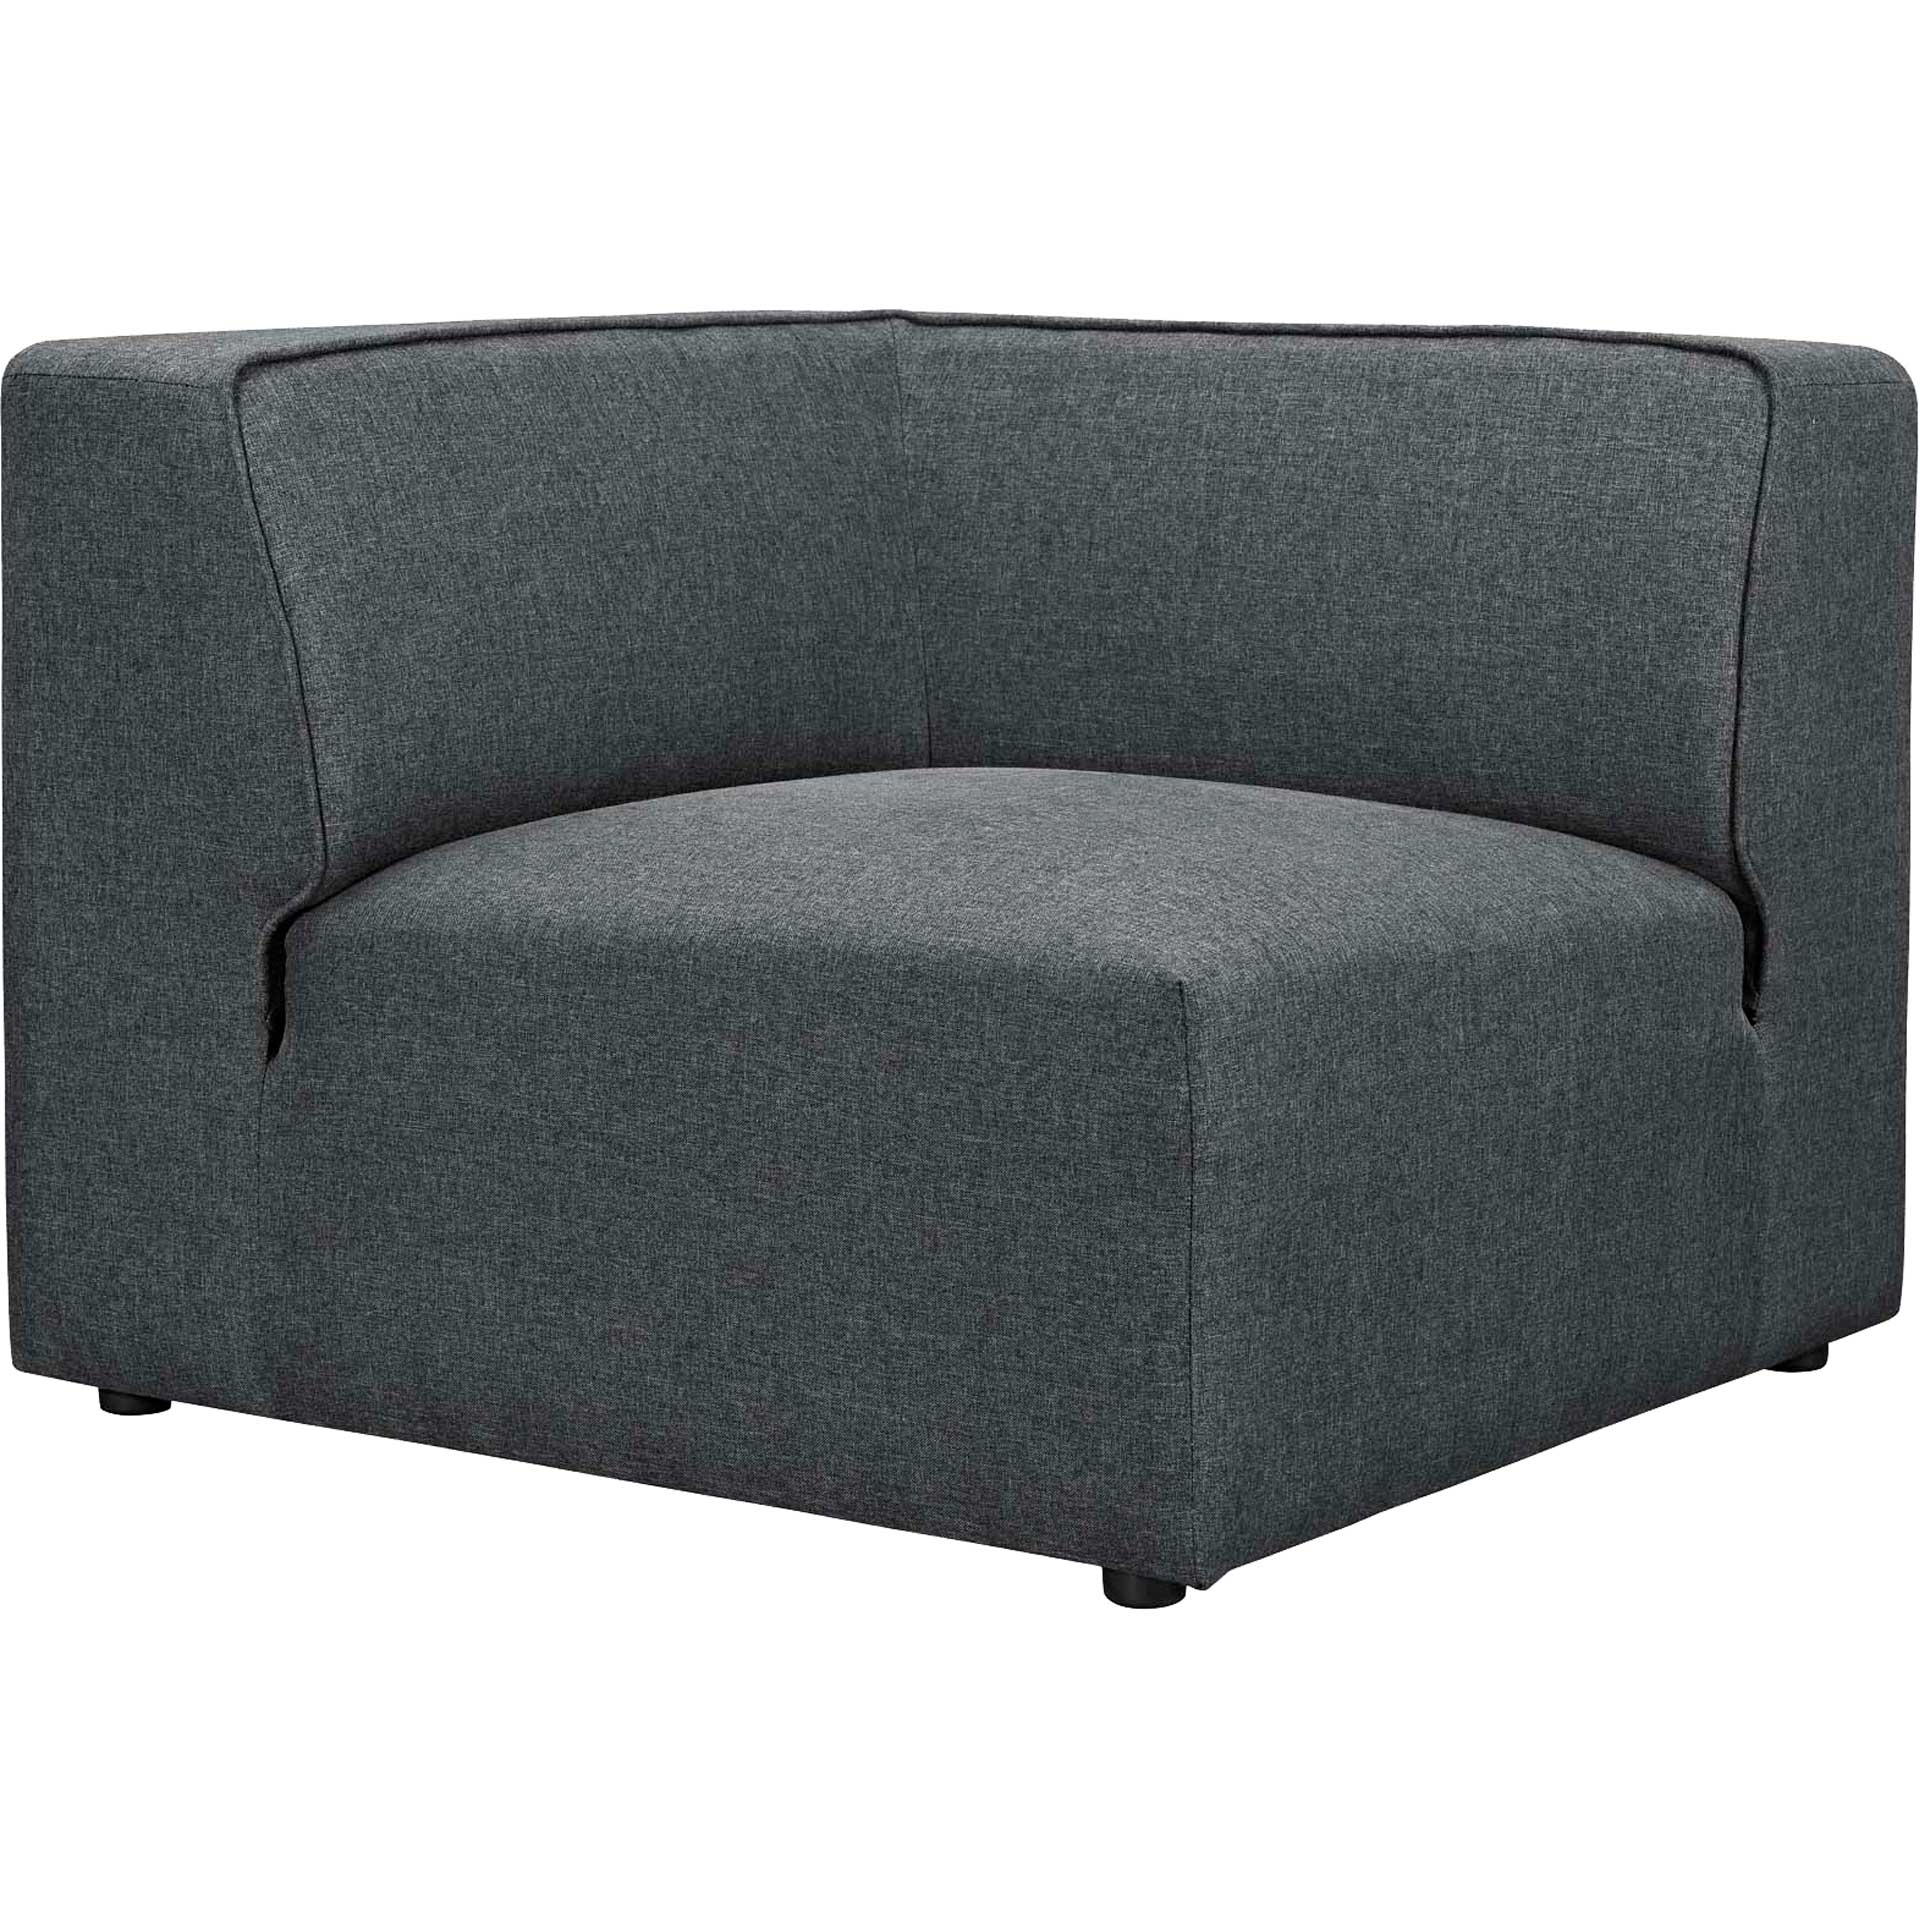 Maisie 5 Piece L-Shaped Sectional Sofa Gray